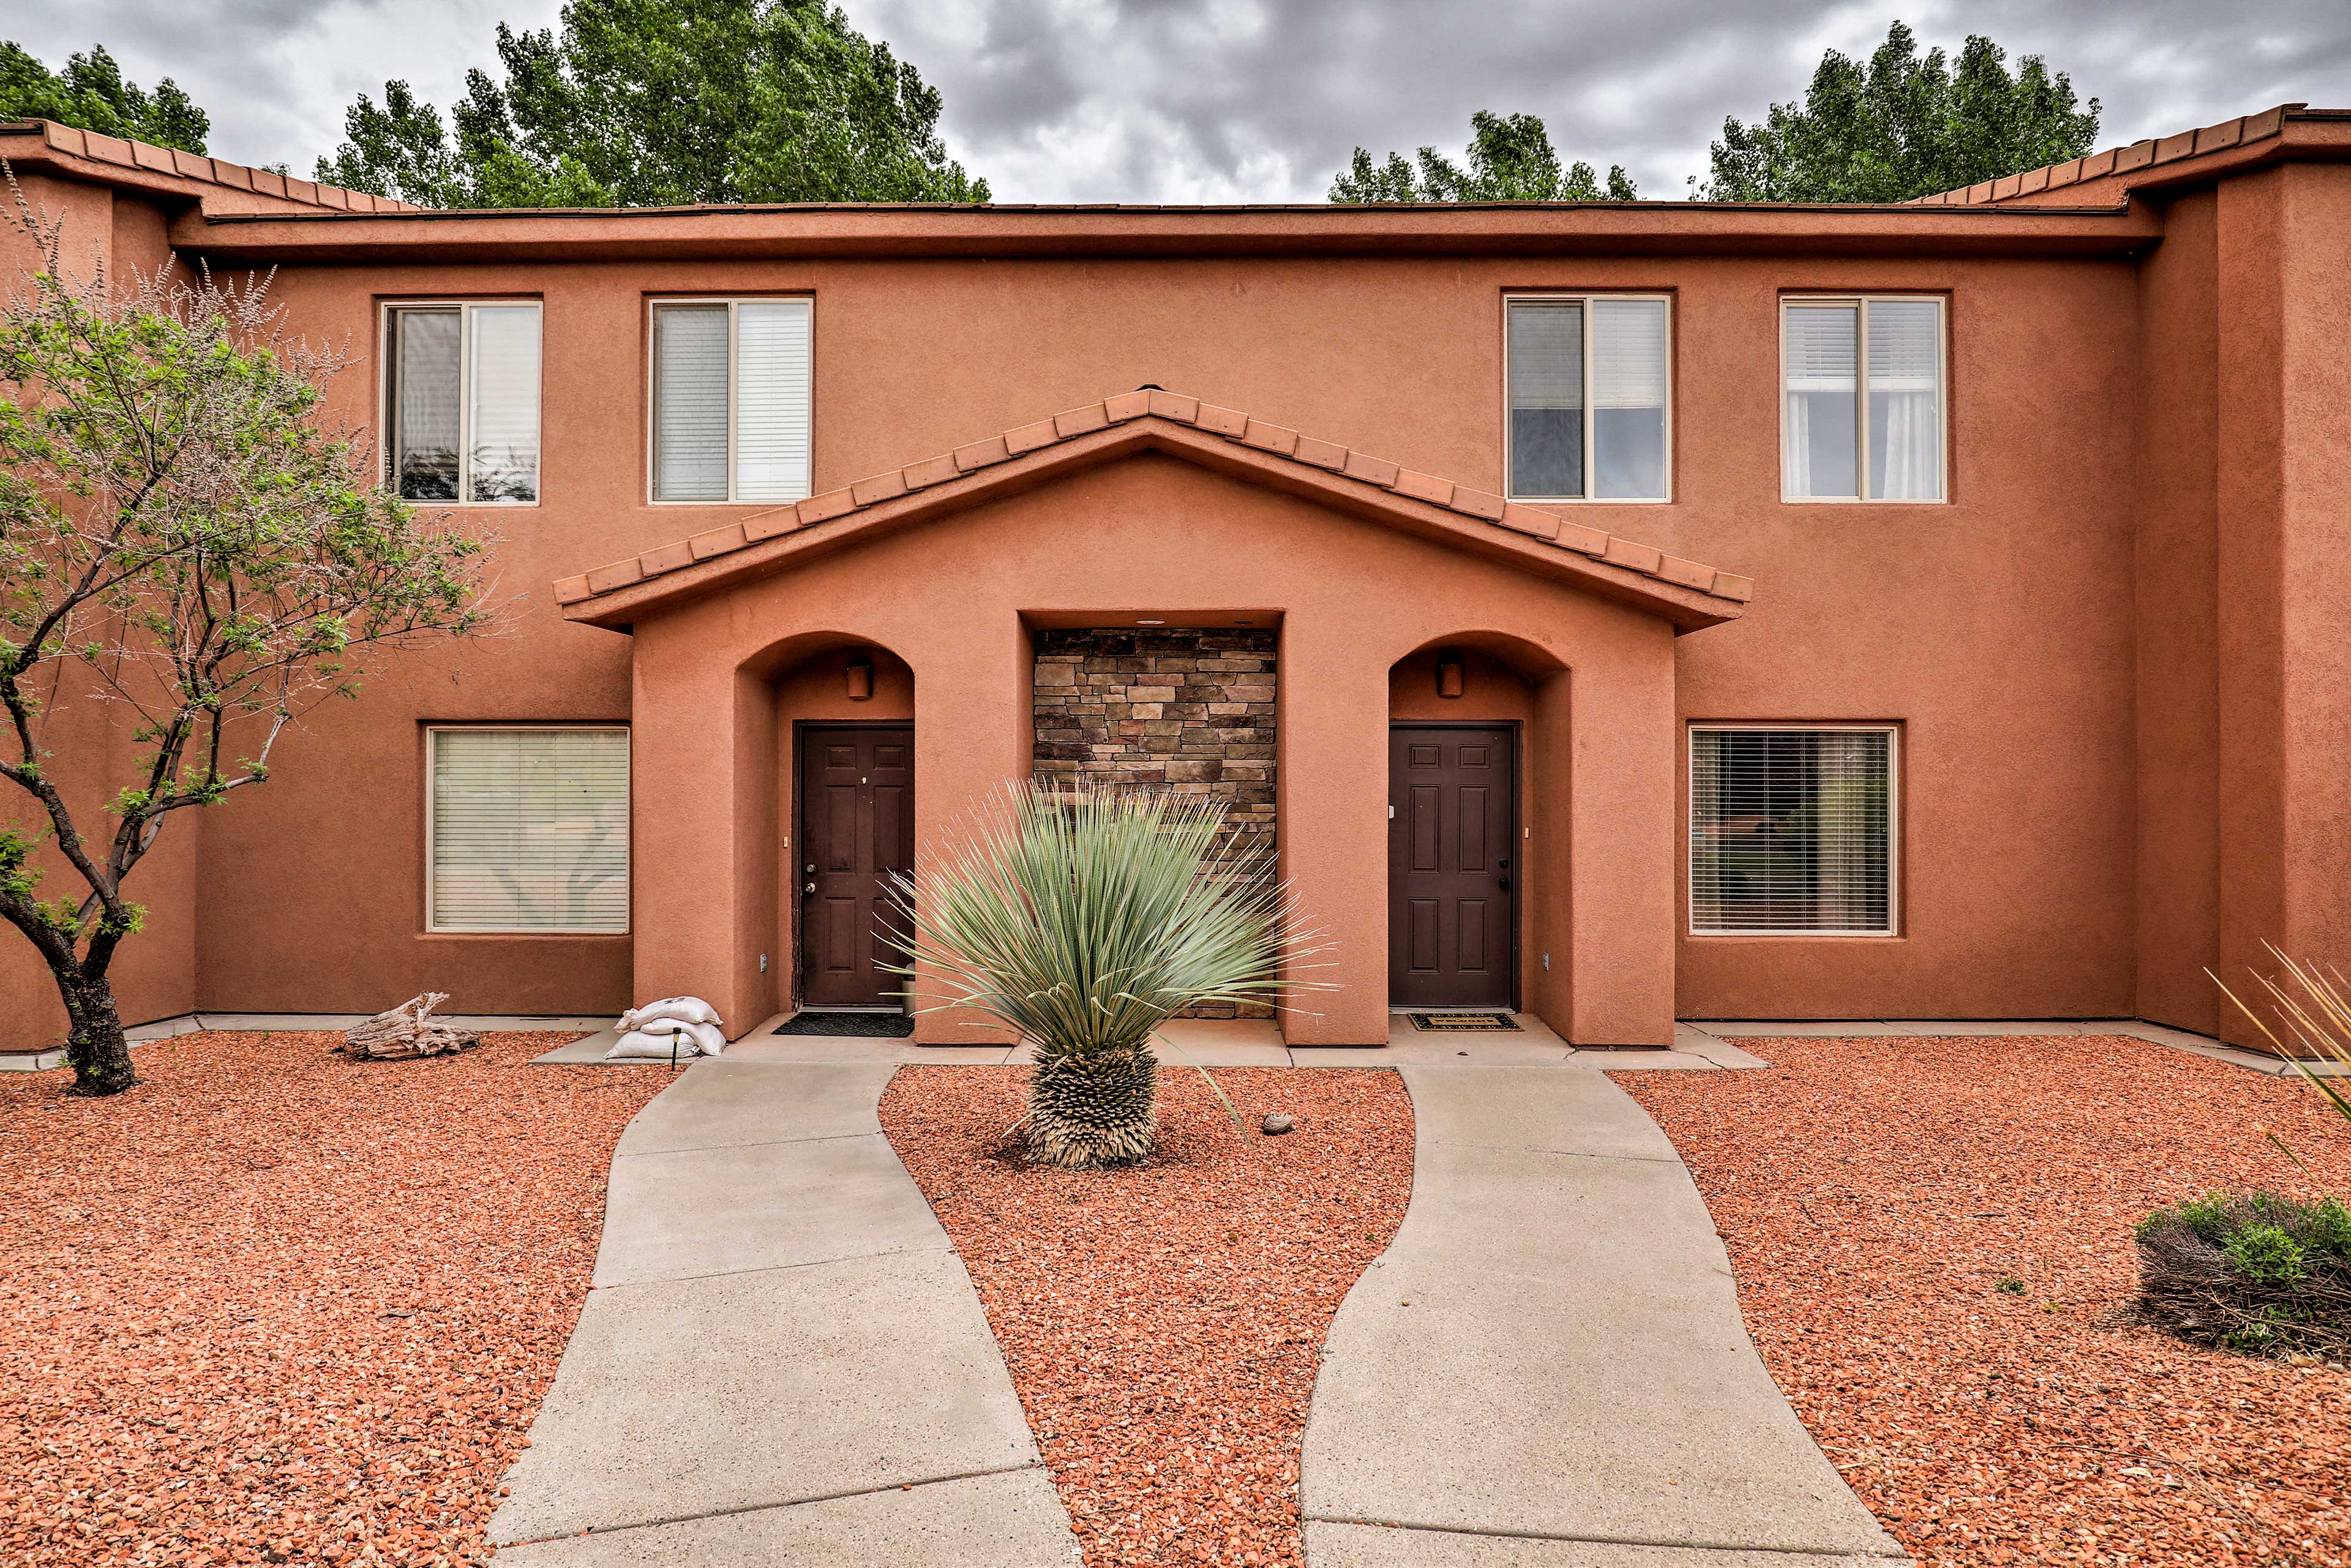 Property Image 2 - Lovely Kanab Condo in Dwtn, 30 mi to Zion NP!